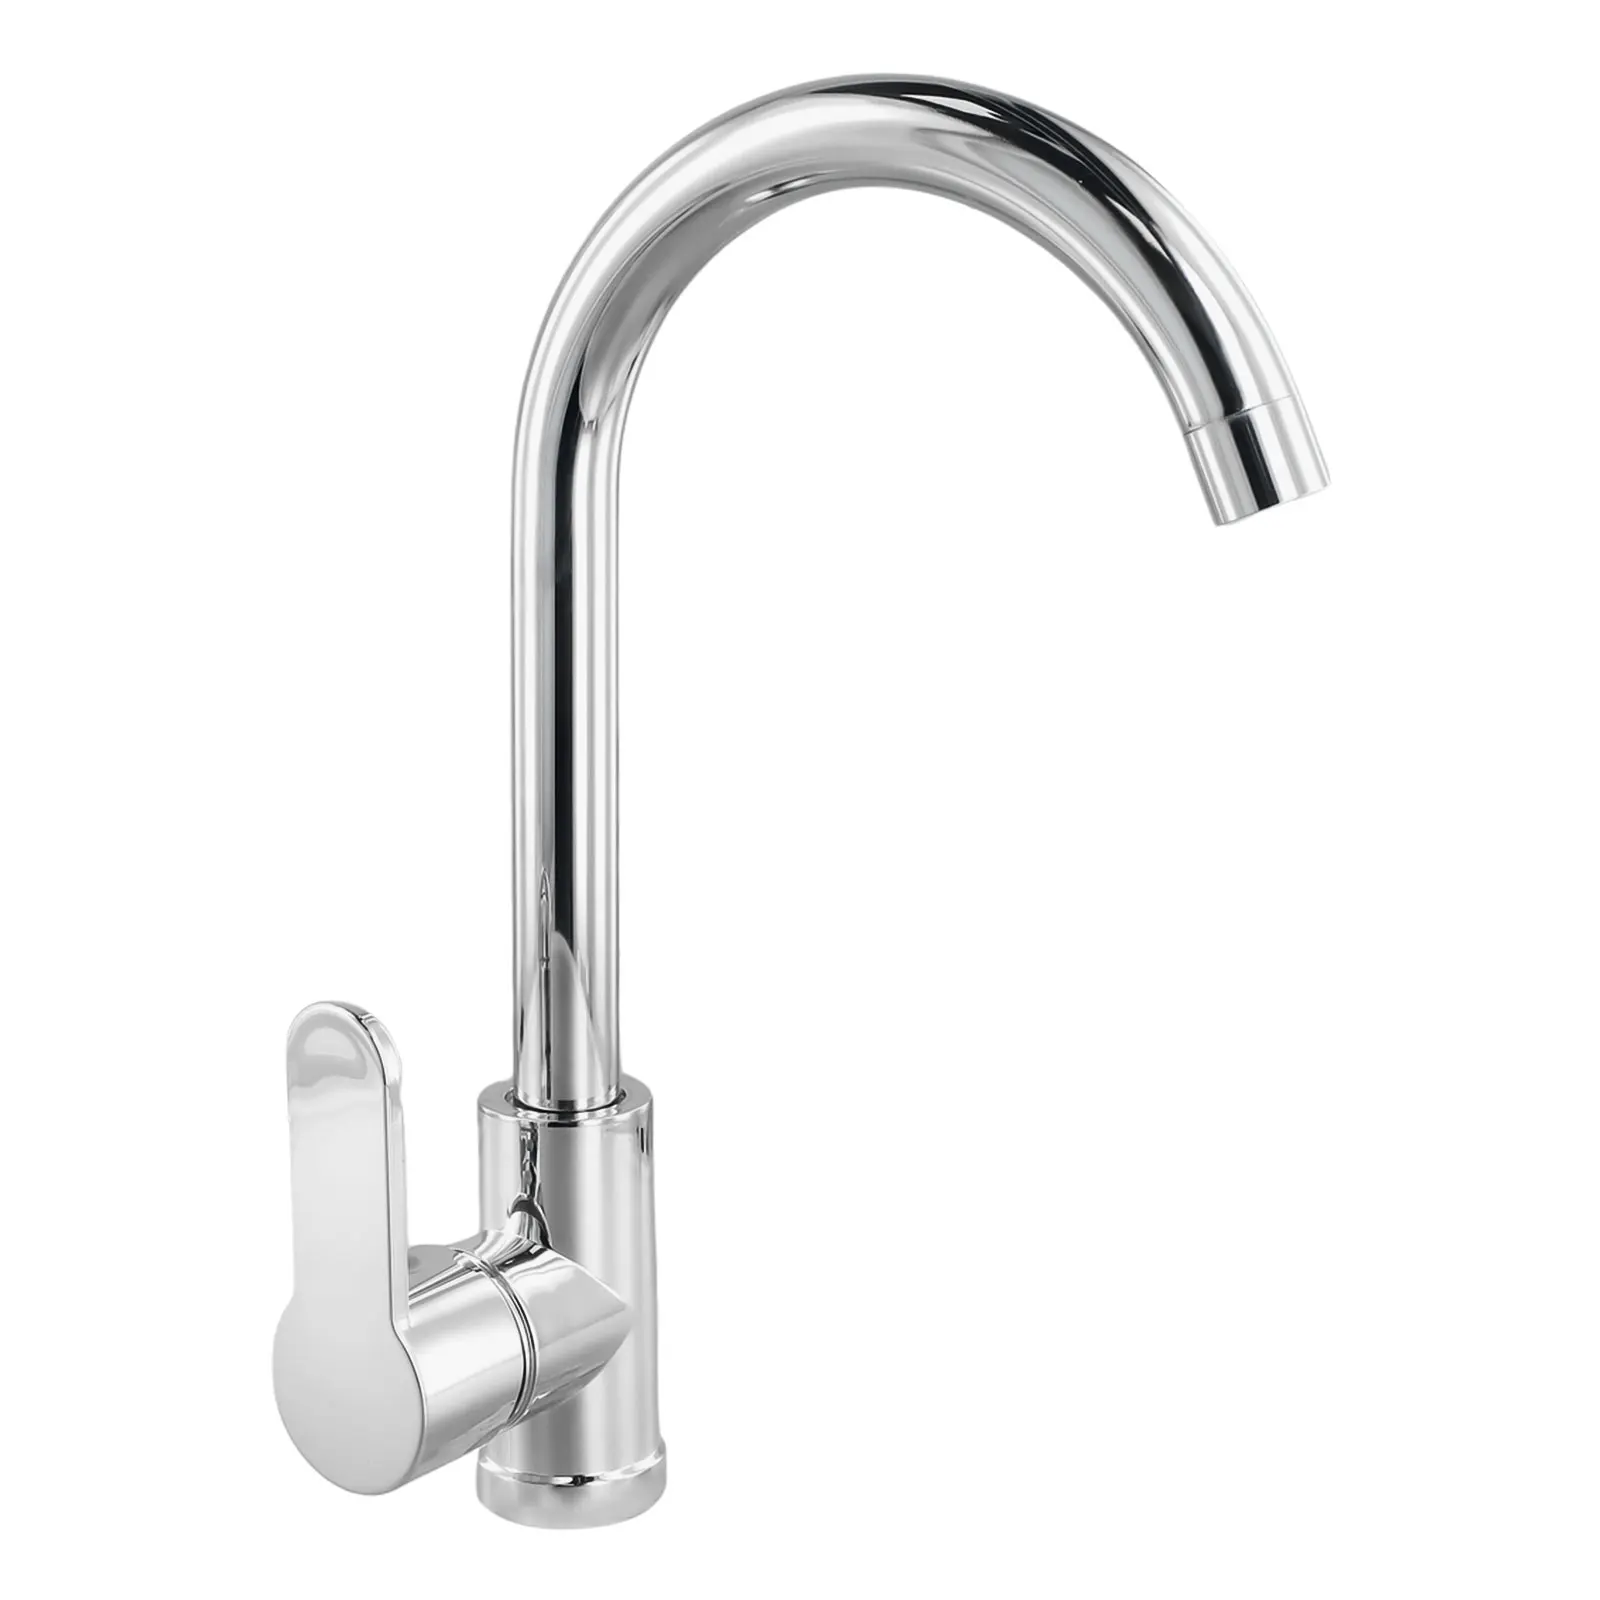 Stainless Steel Kitchen Faucet Polished Chrome Plated Swivel Basin Sink Cold Hot Easy To Operate Mixer Tap chrome basin faucet brass desk mount sinlge handle hot and cold water tap bathroom faucets washroom toilet sink mixer black